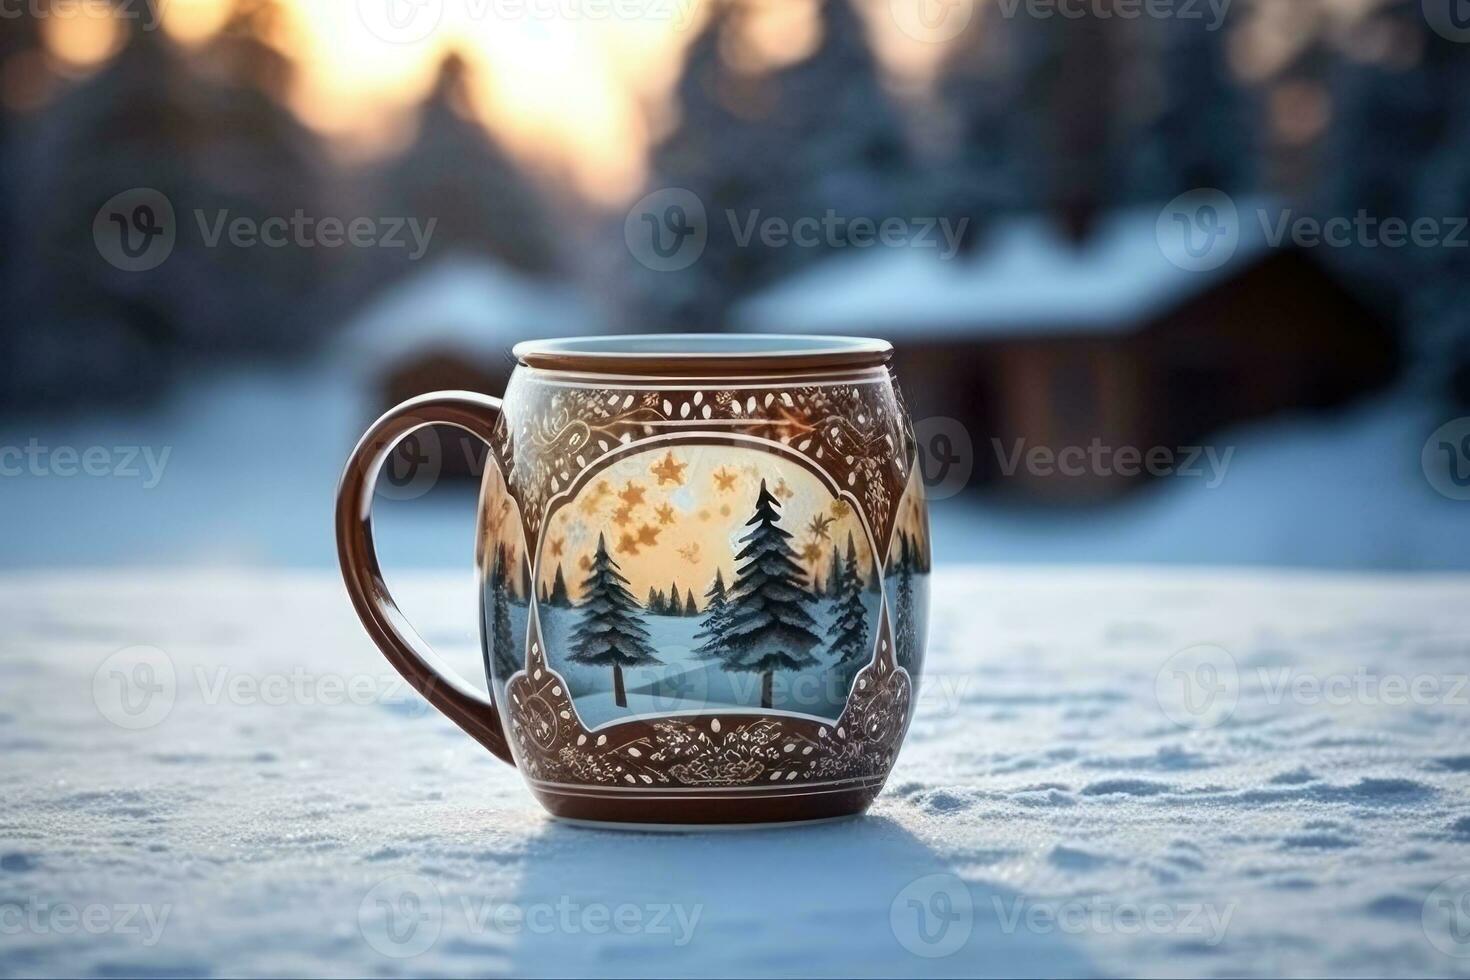 https://static.vecteezy.com/system/resources/previews/026/439/976/non_2x/decorated-christmas-coffee-mug-with-winter-forest-landscape-and-snow-generative-ai-photo.jpg